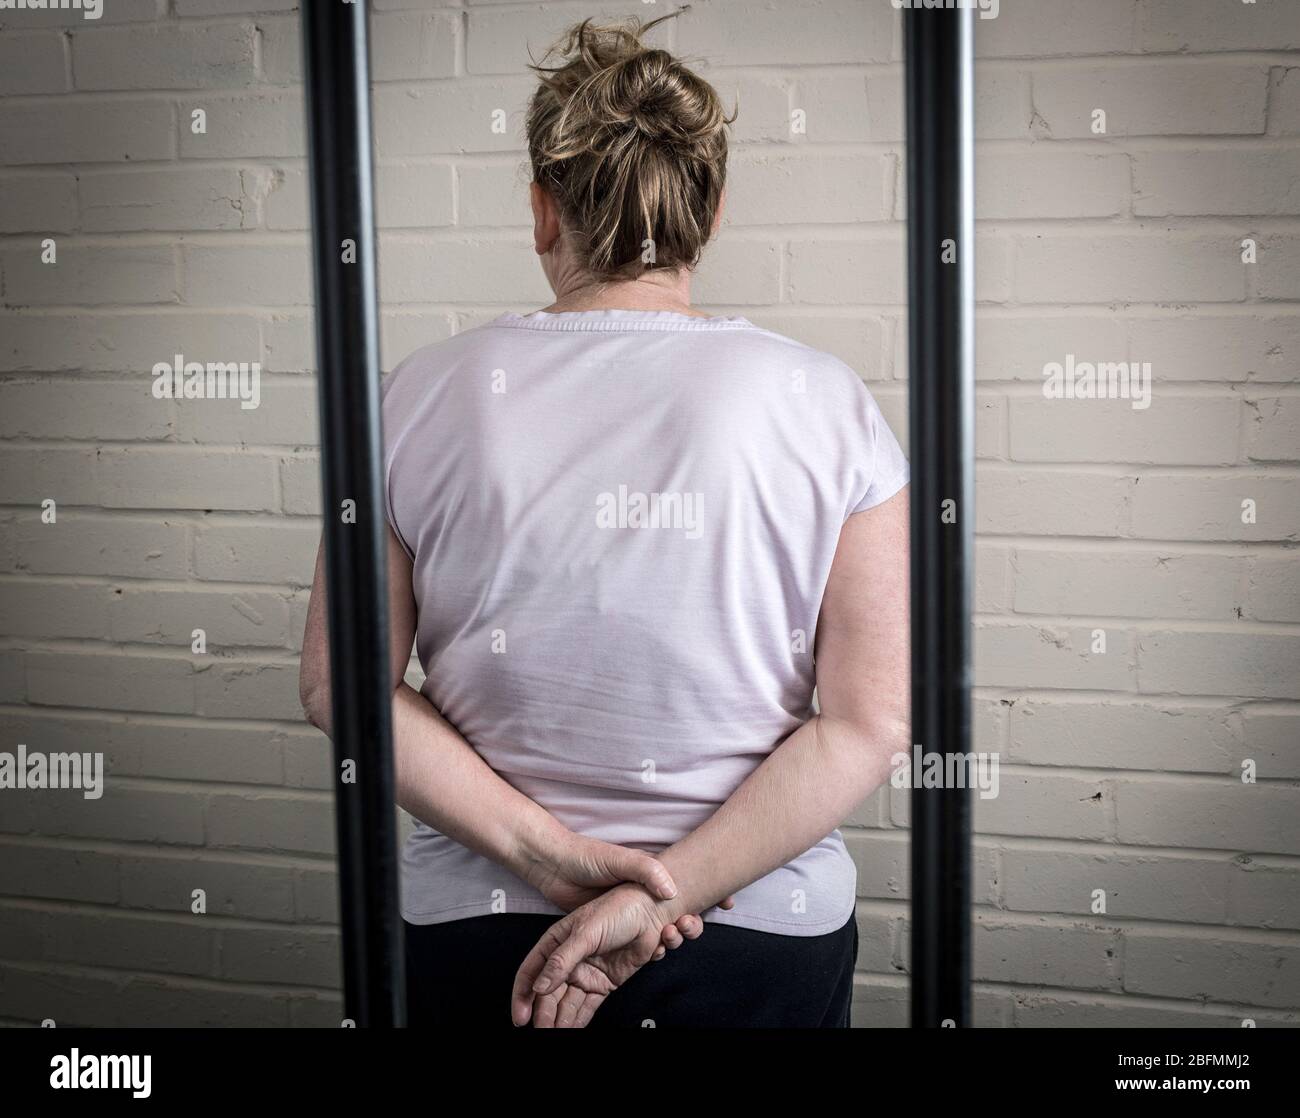 Prisoner Behind Bars High Resolution Stock Photography and Images Alamy